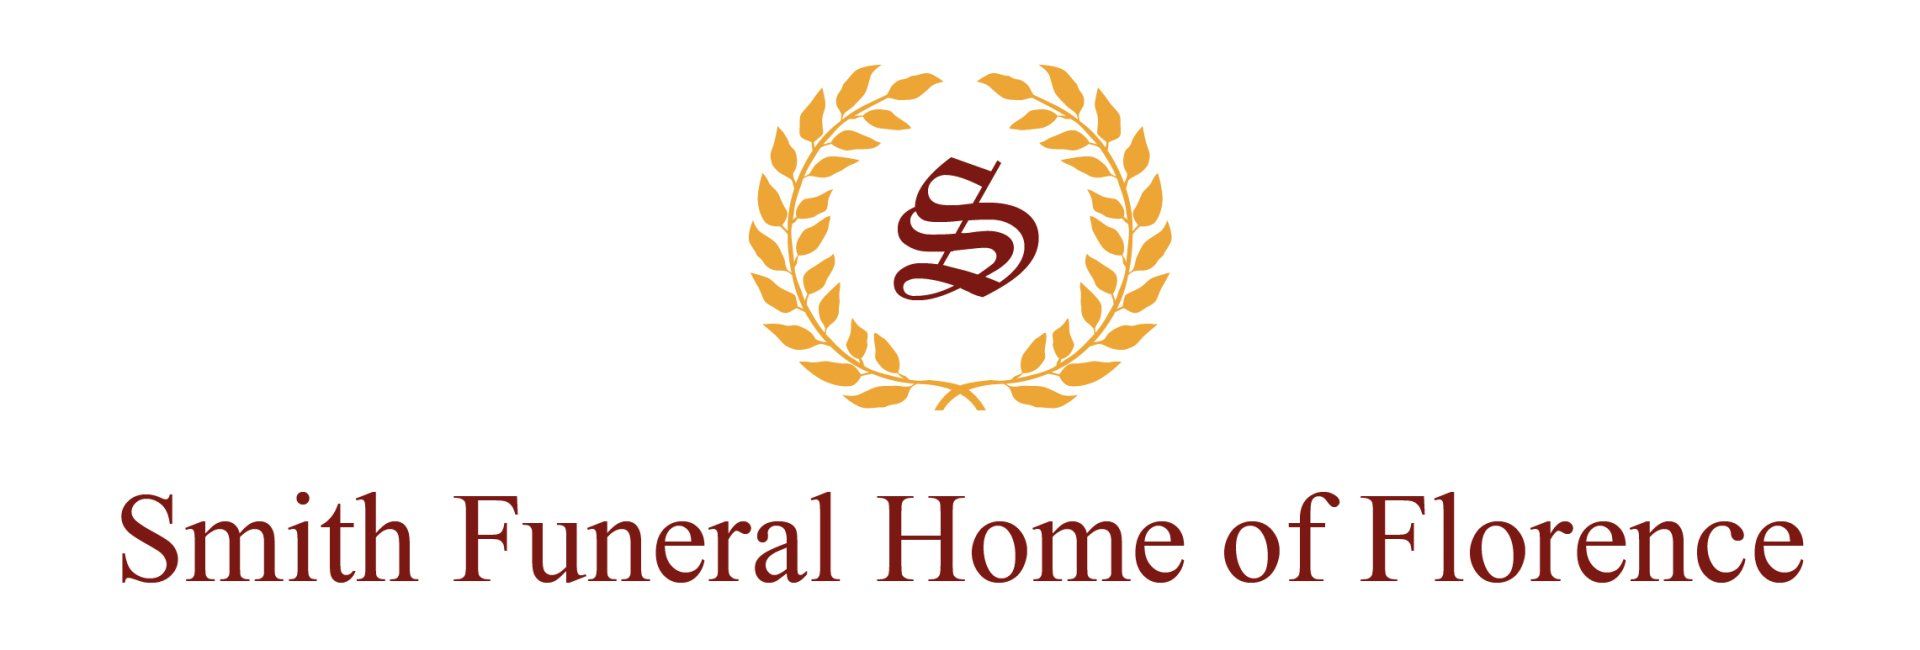 funeral homes in florence county sc